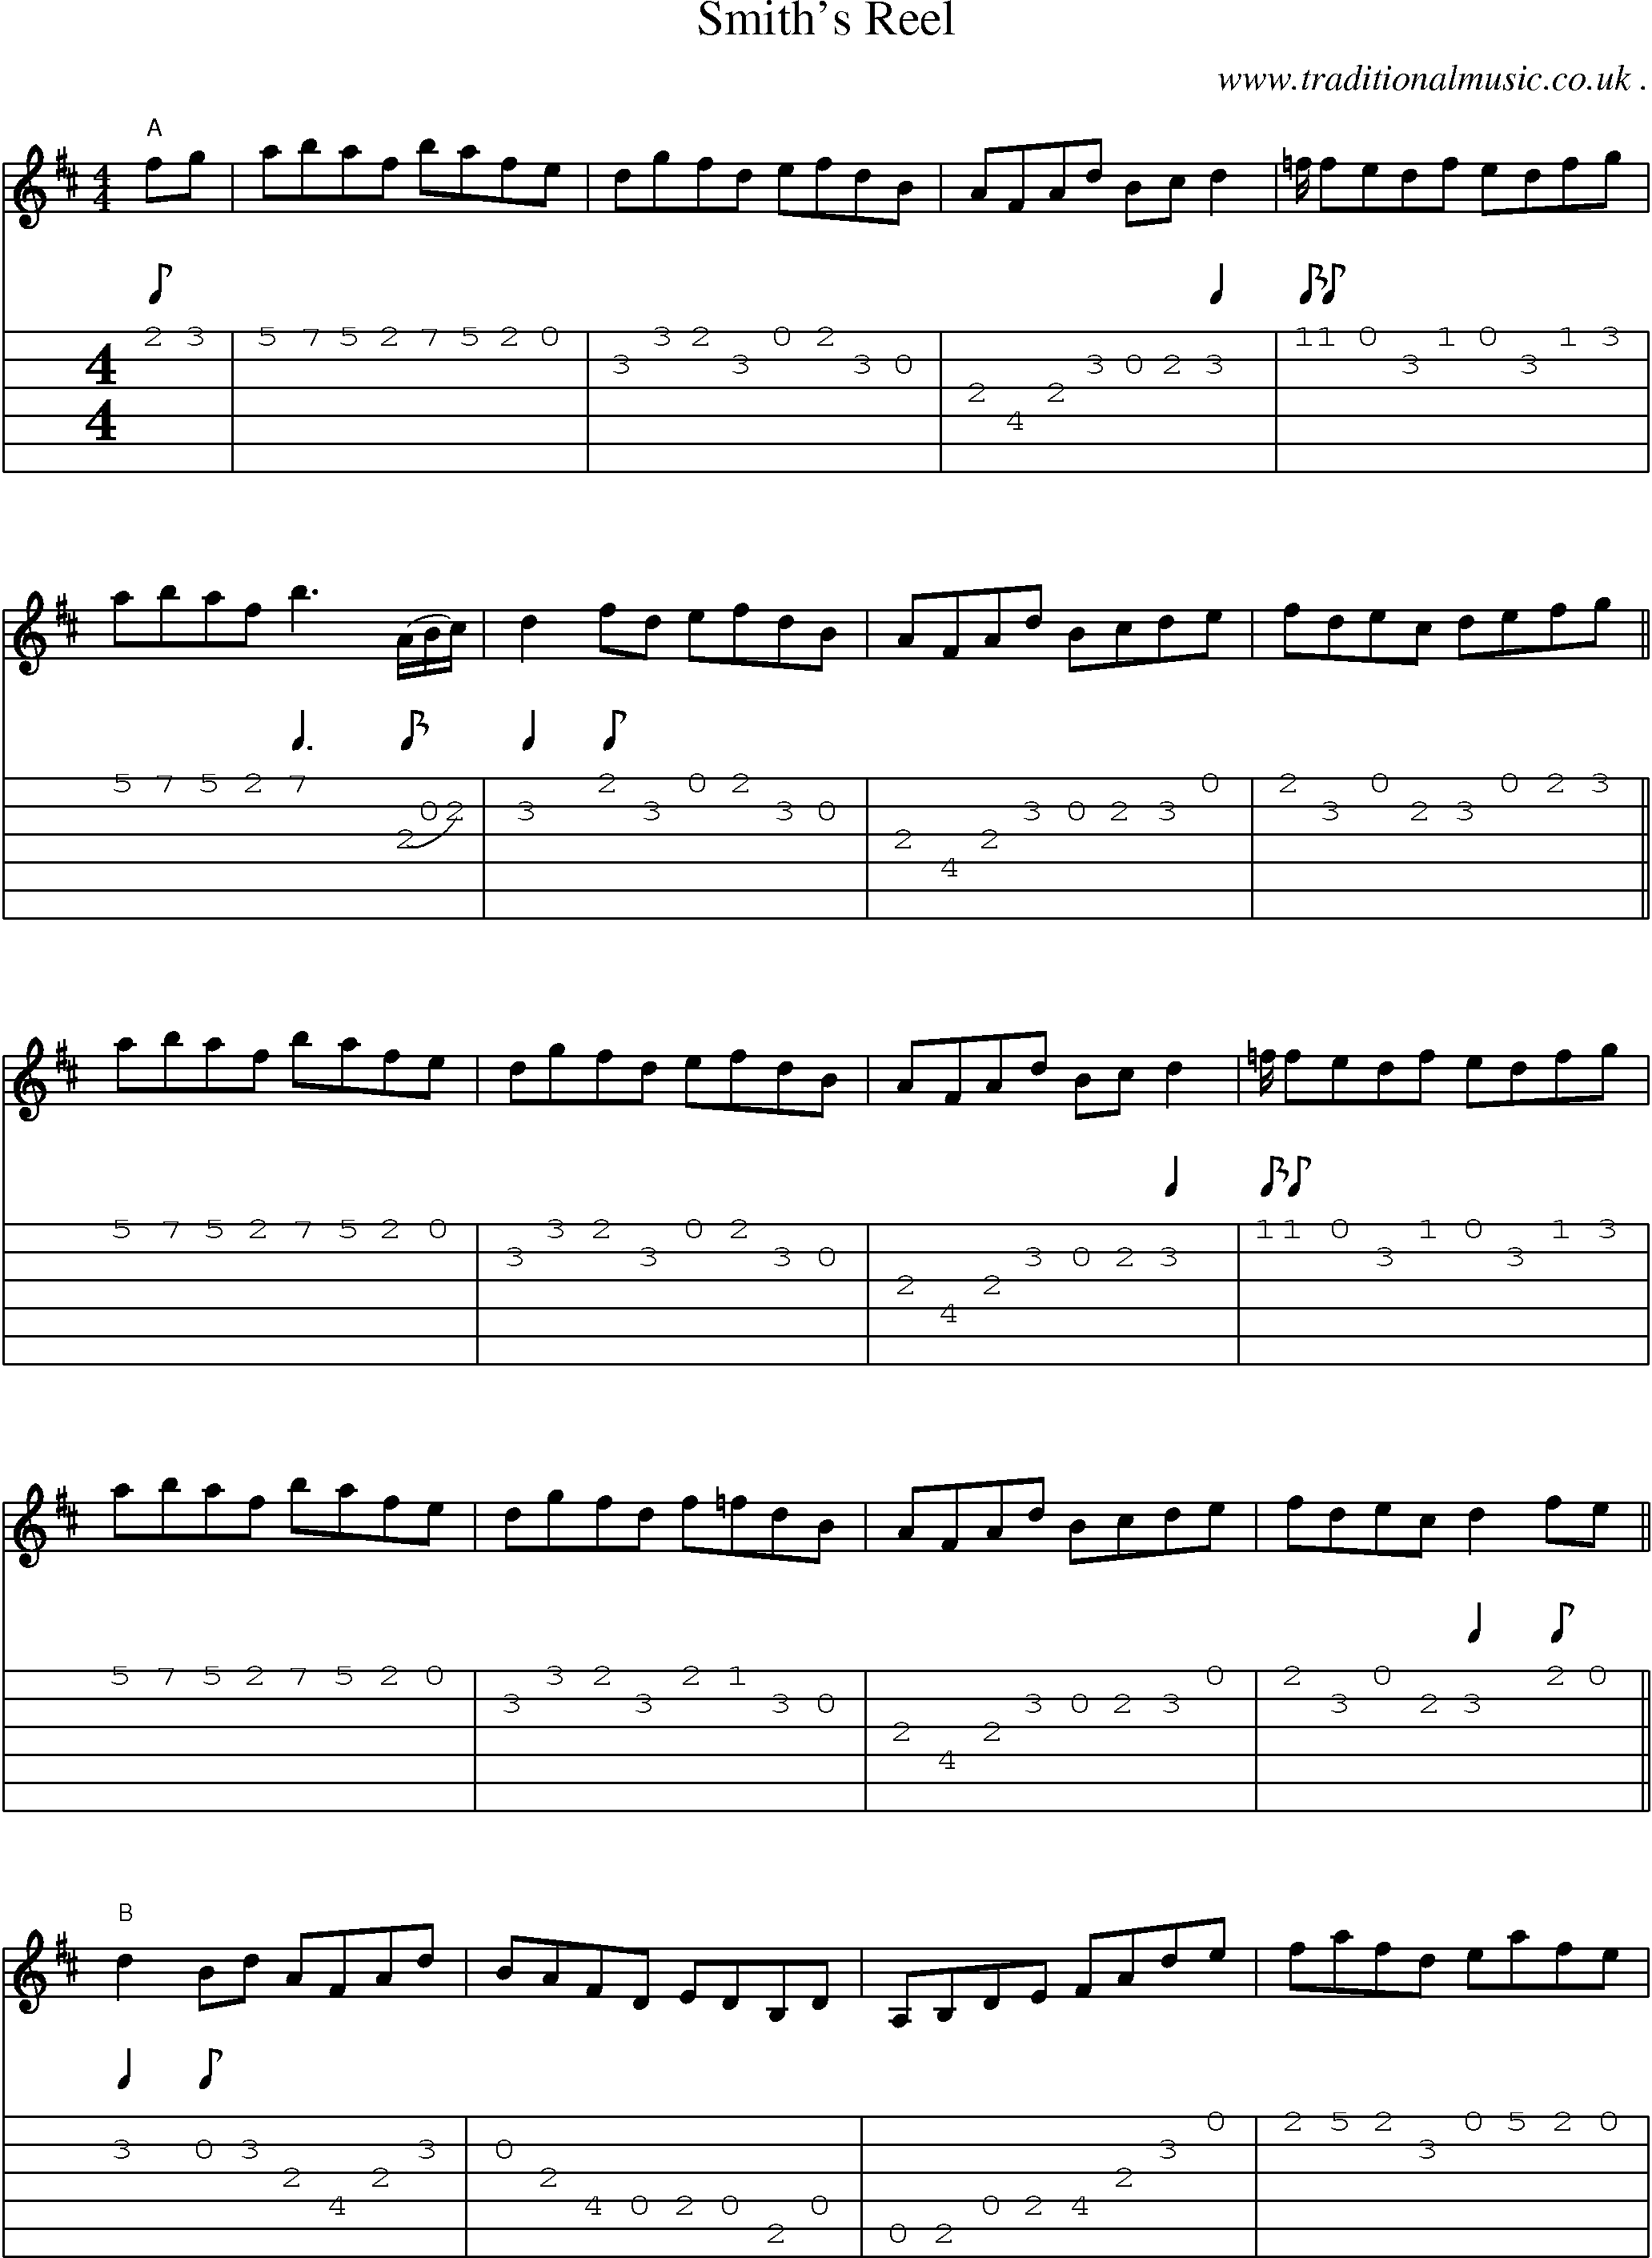 Sheet-Music and Guitar Tabs for Smiths Reel